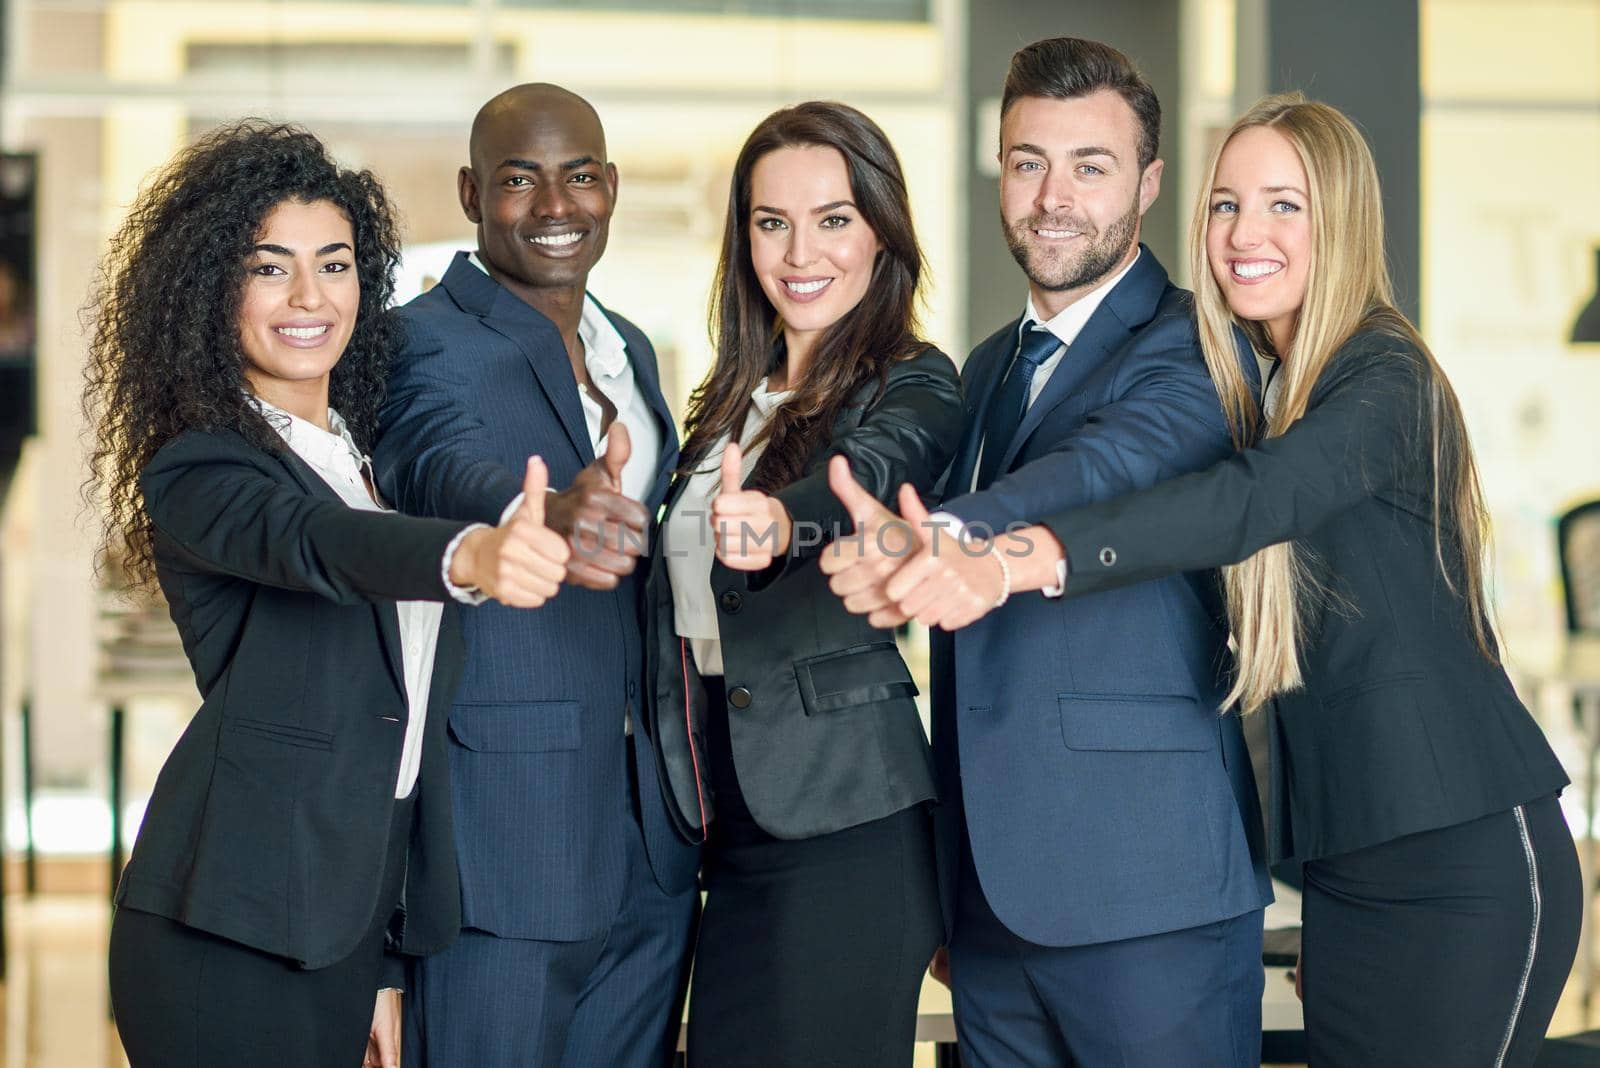 Group of businesspeople with thumbs up gesture in modern office. by javiindy